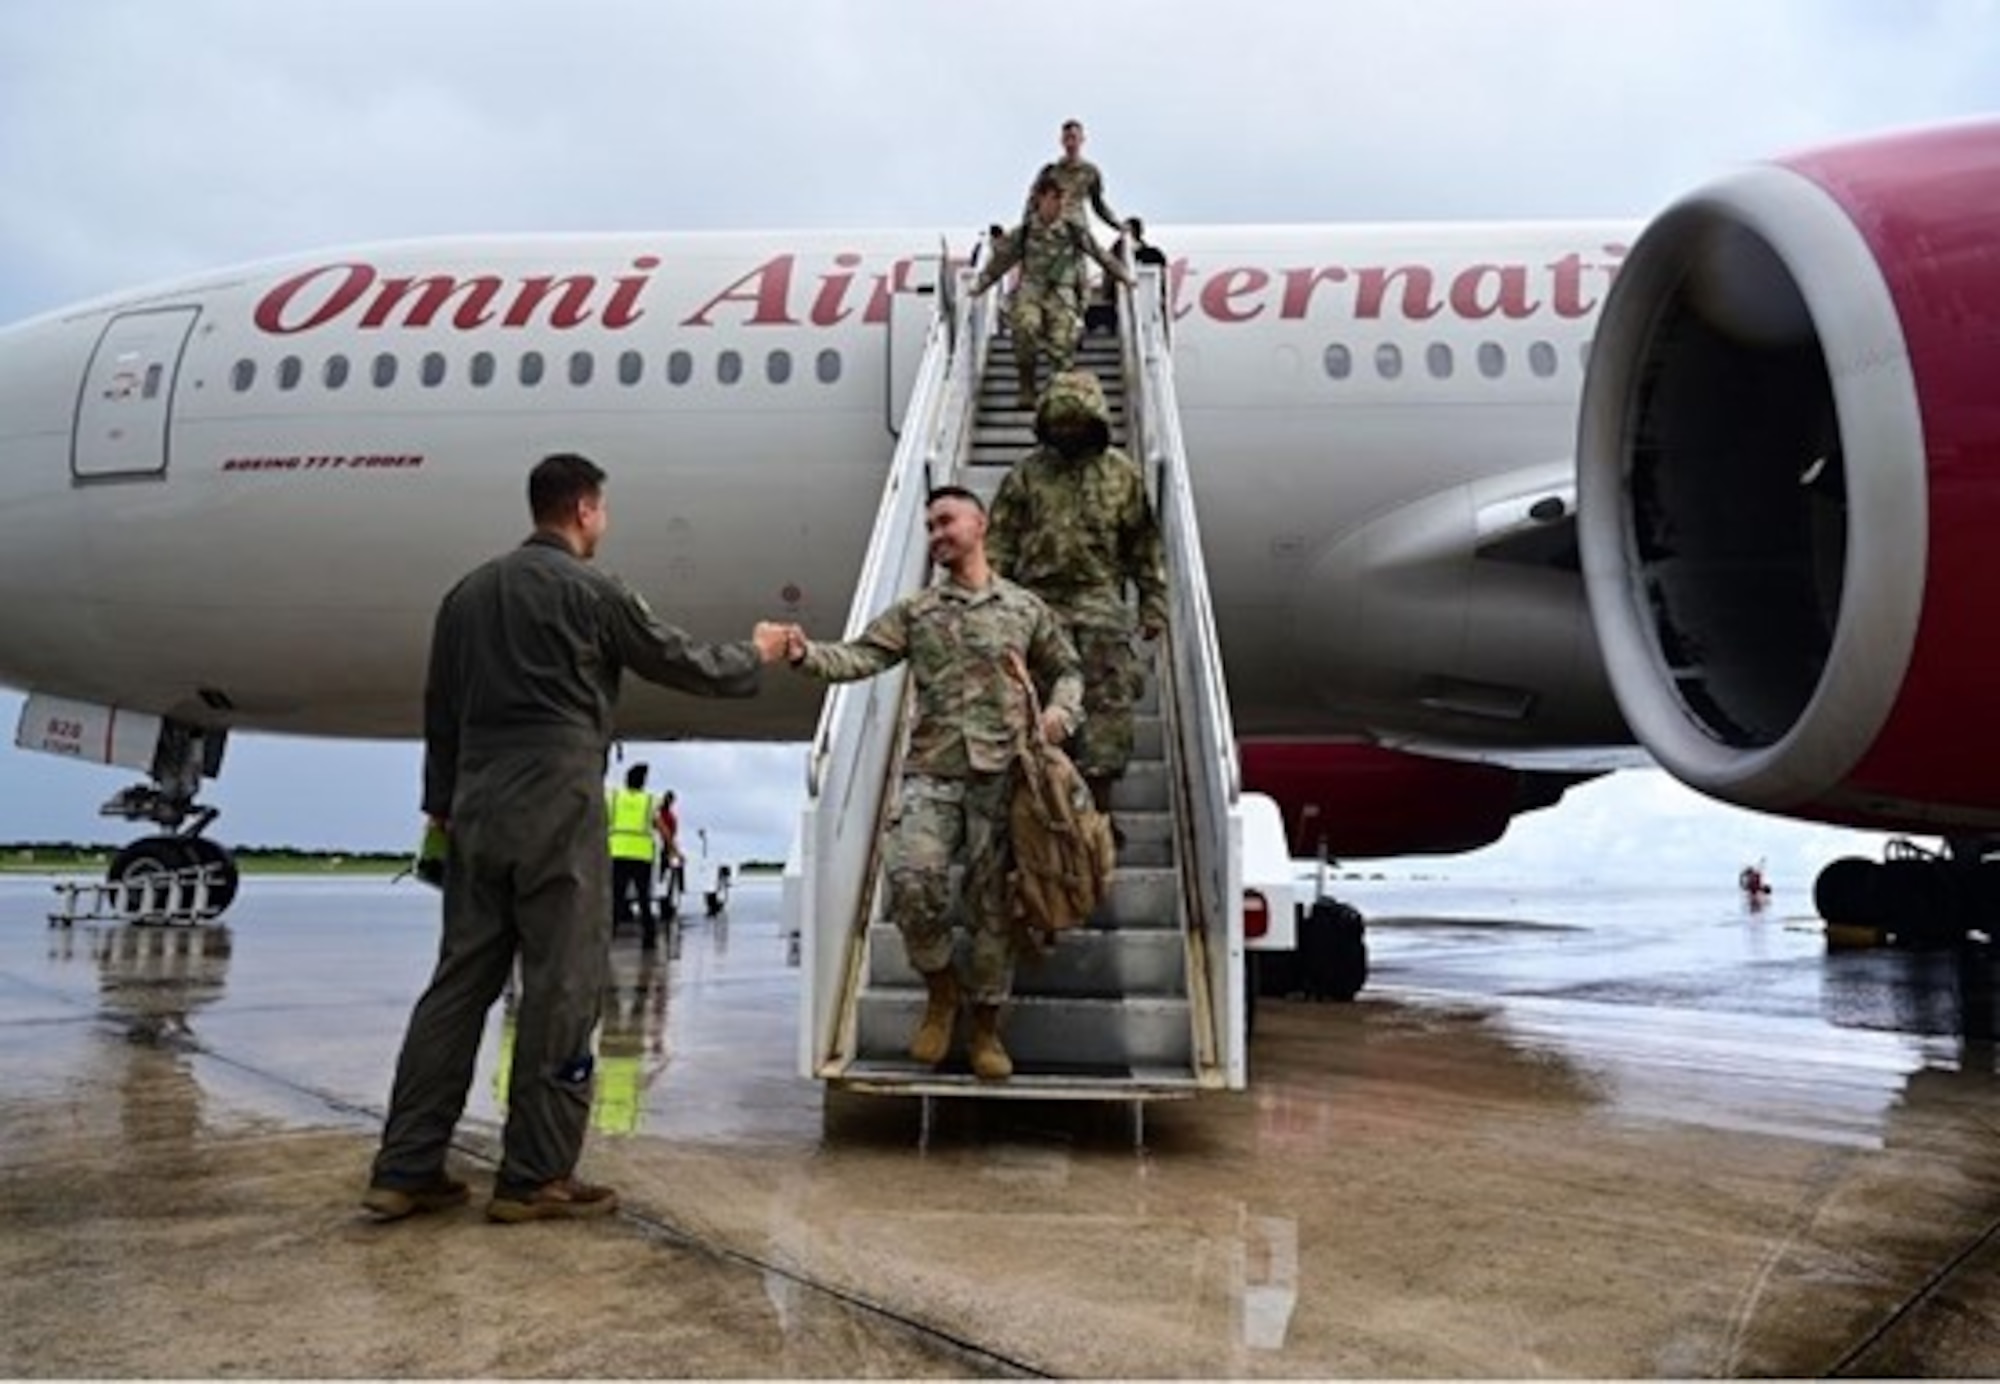 U.S. Air Force Lt. Col. Daniel Mount, 37th Bomb Squadron Director of Operations, greets Airmen from Ellsworth Air Force Base, South Dakota, as they arrive at Andersen AFB, Guam, for a Bomber Task Force Mission, October 16, 2022. Bomber Task Force missions enhance readiness, to include joint and multi-lateral, to respond to any potential crisis or challenge in the Indo-Pacific. (U.S. Air Force photo by Staff Sgt. Hannah Malone)